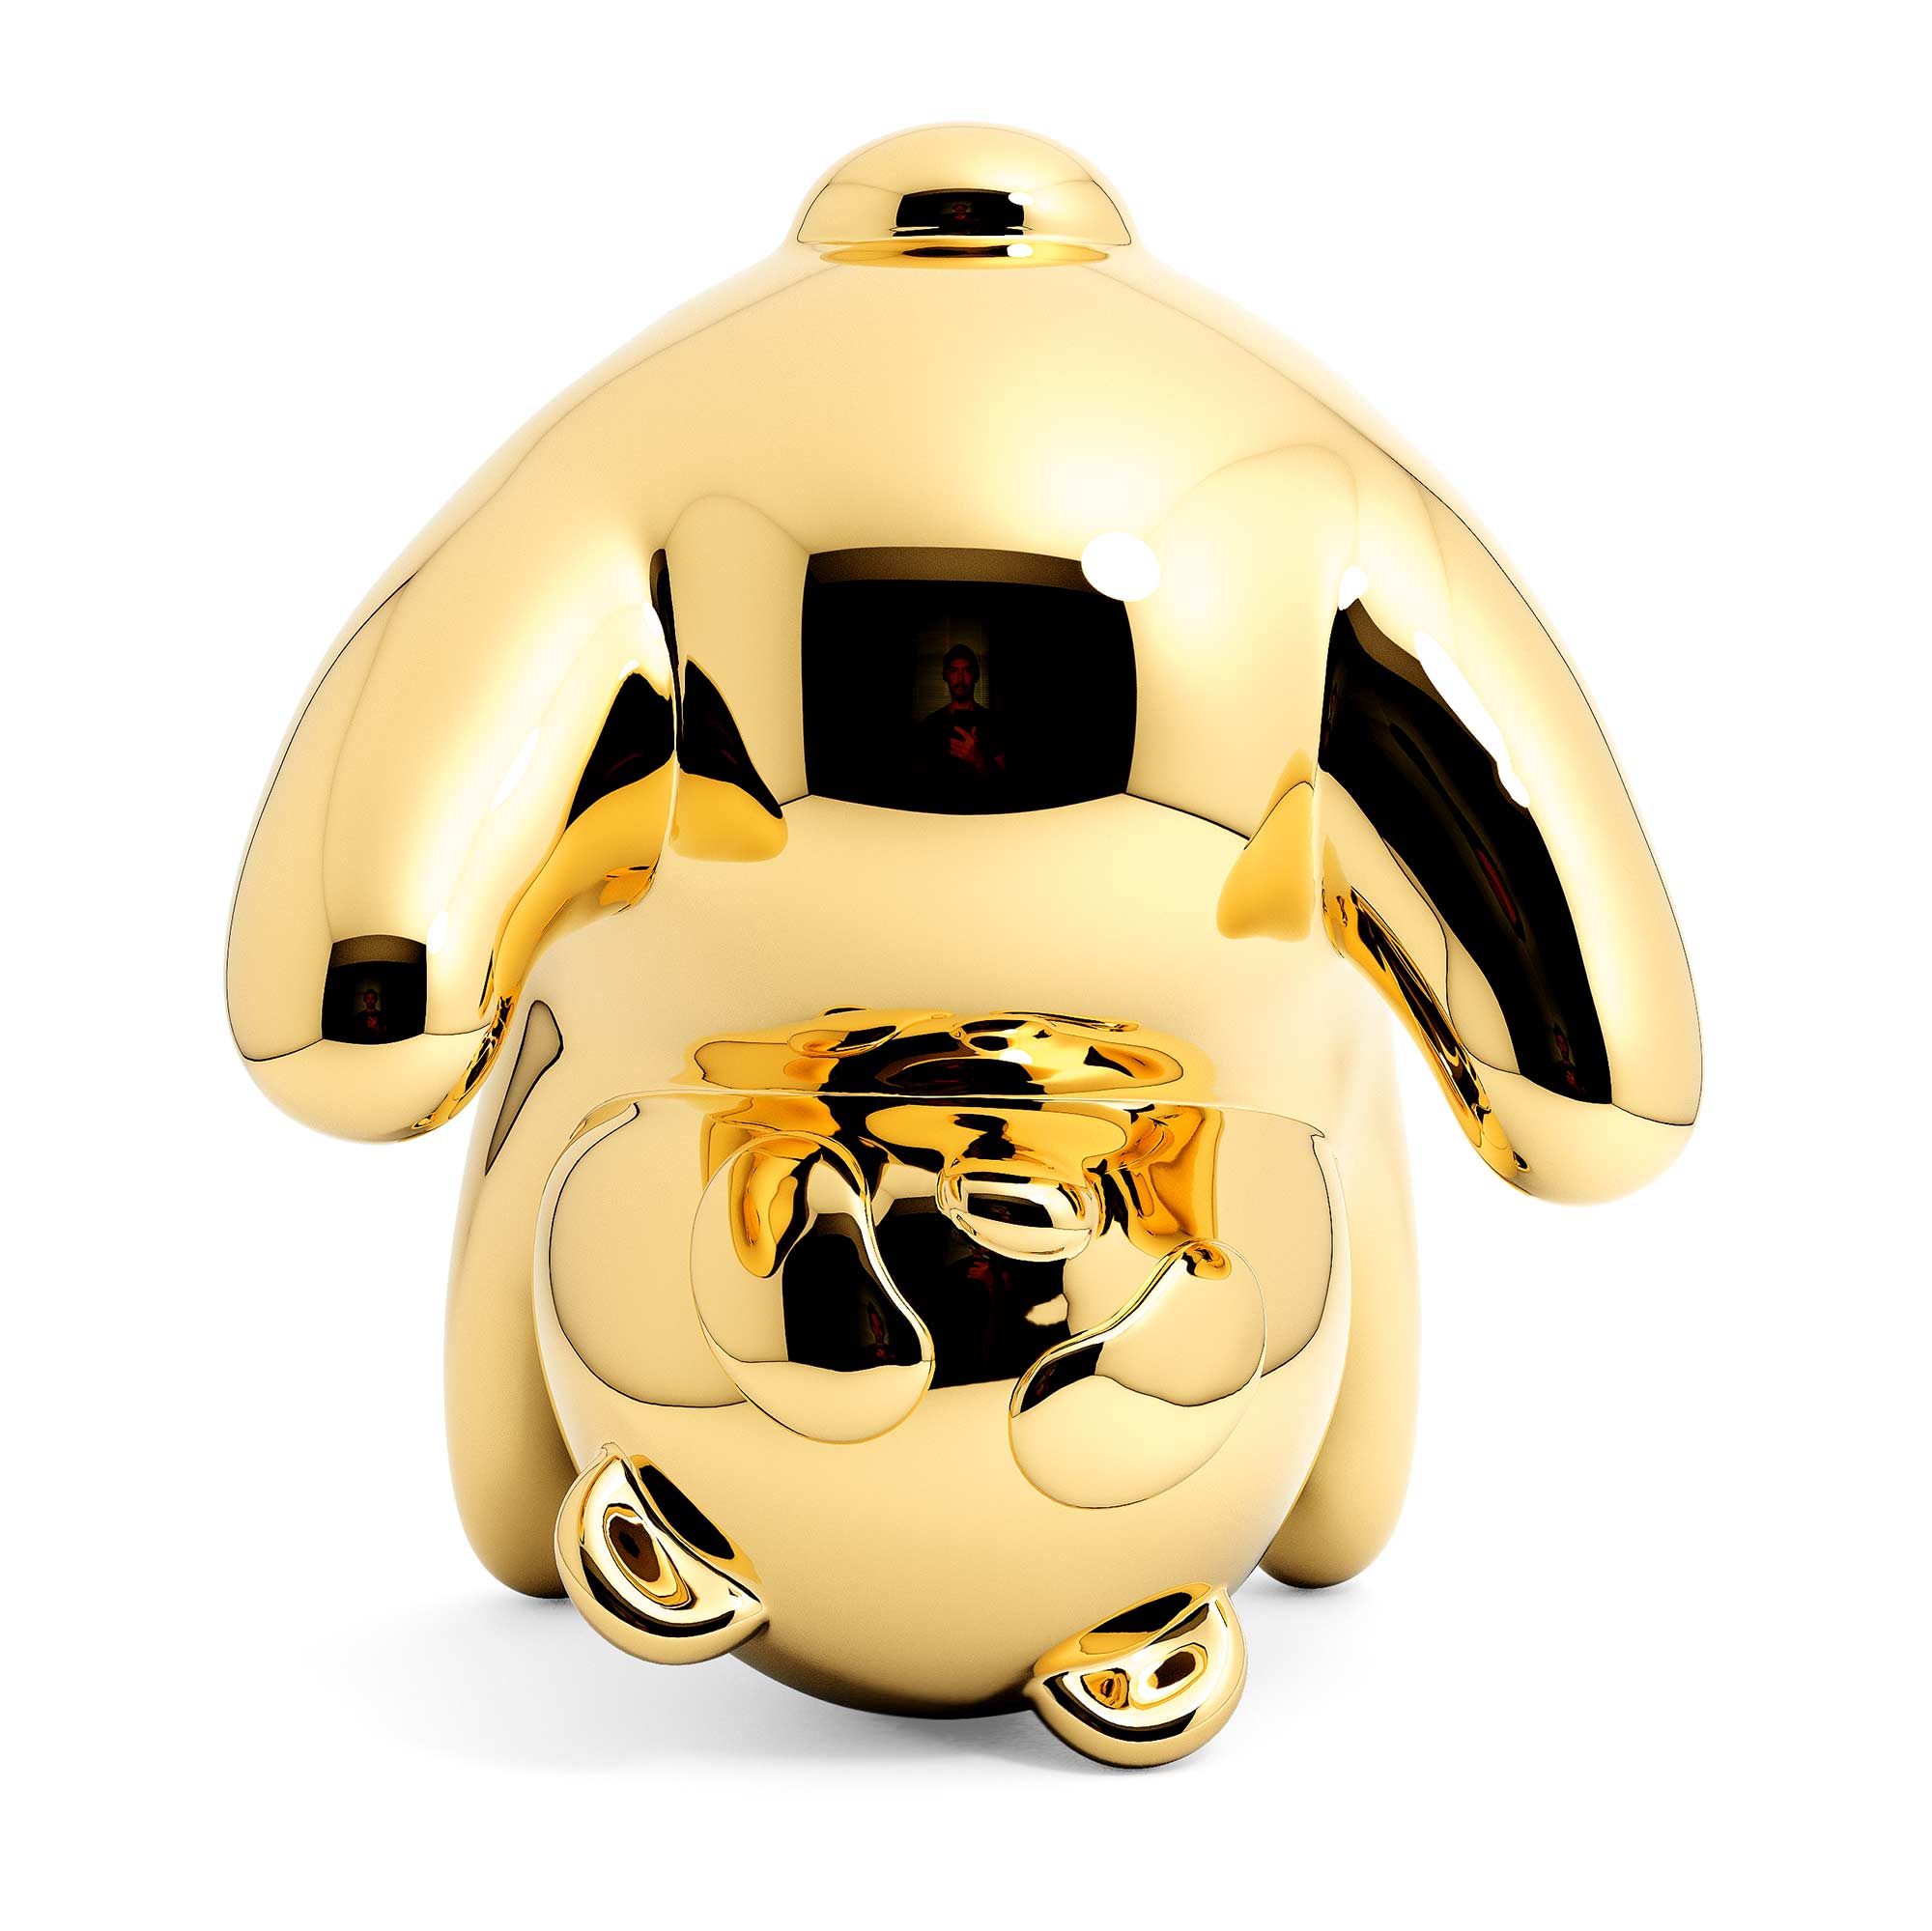 Panda-monium, gold coated Mirror Polished Stainless Steel Sculpture, by artist Ferdi B Dick, front view 